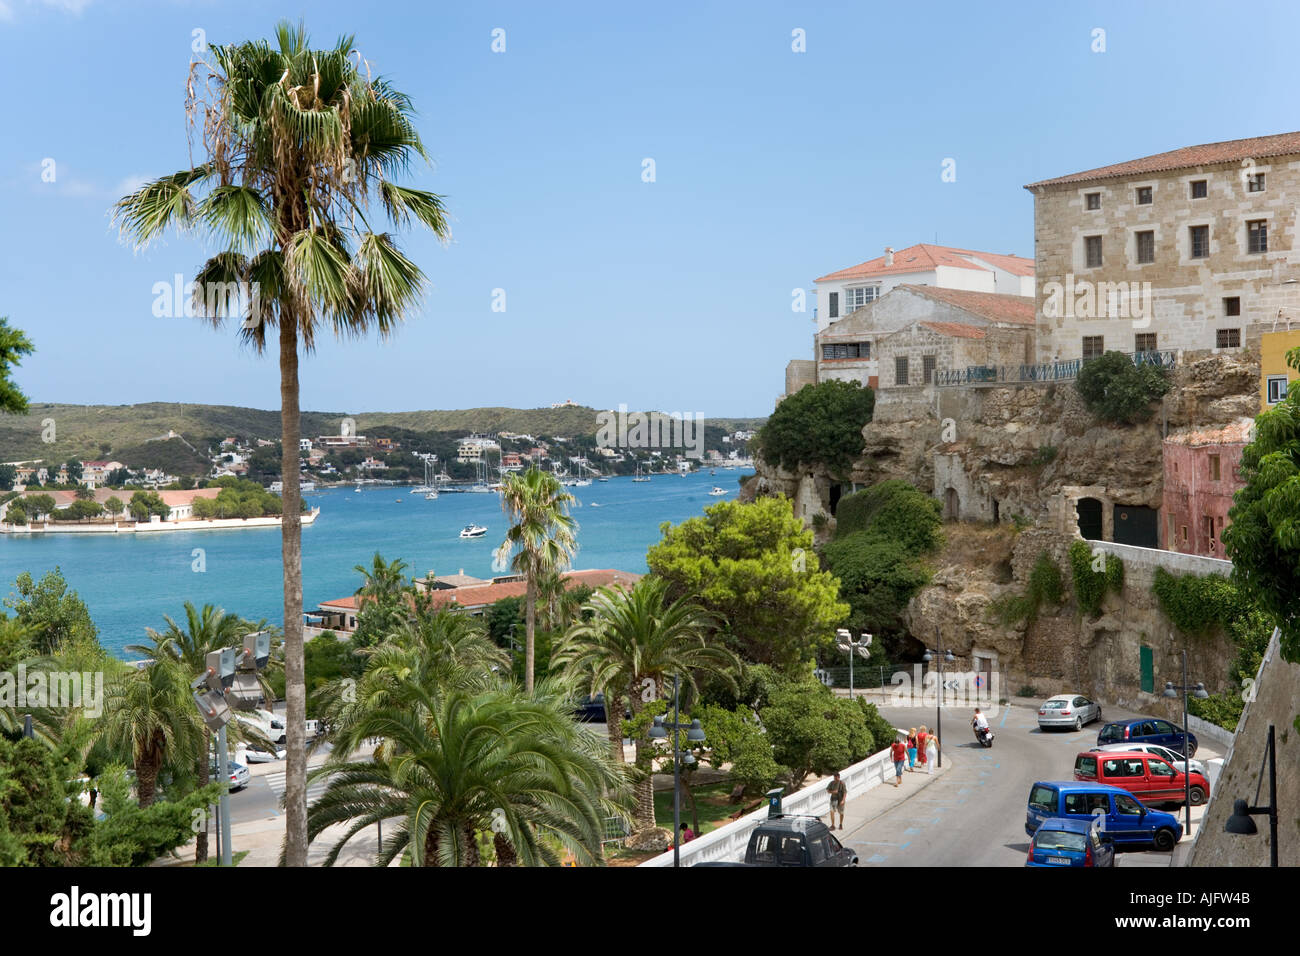 Harbour in the old town, Mahon, Menorca, Balearic Islands, Spain Stock Photo